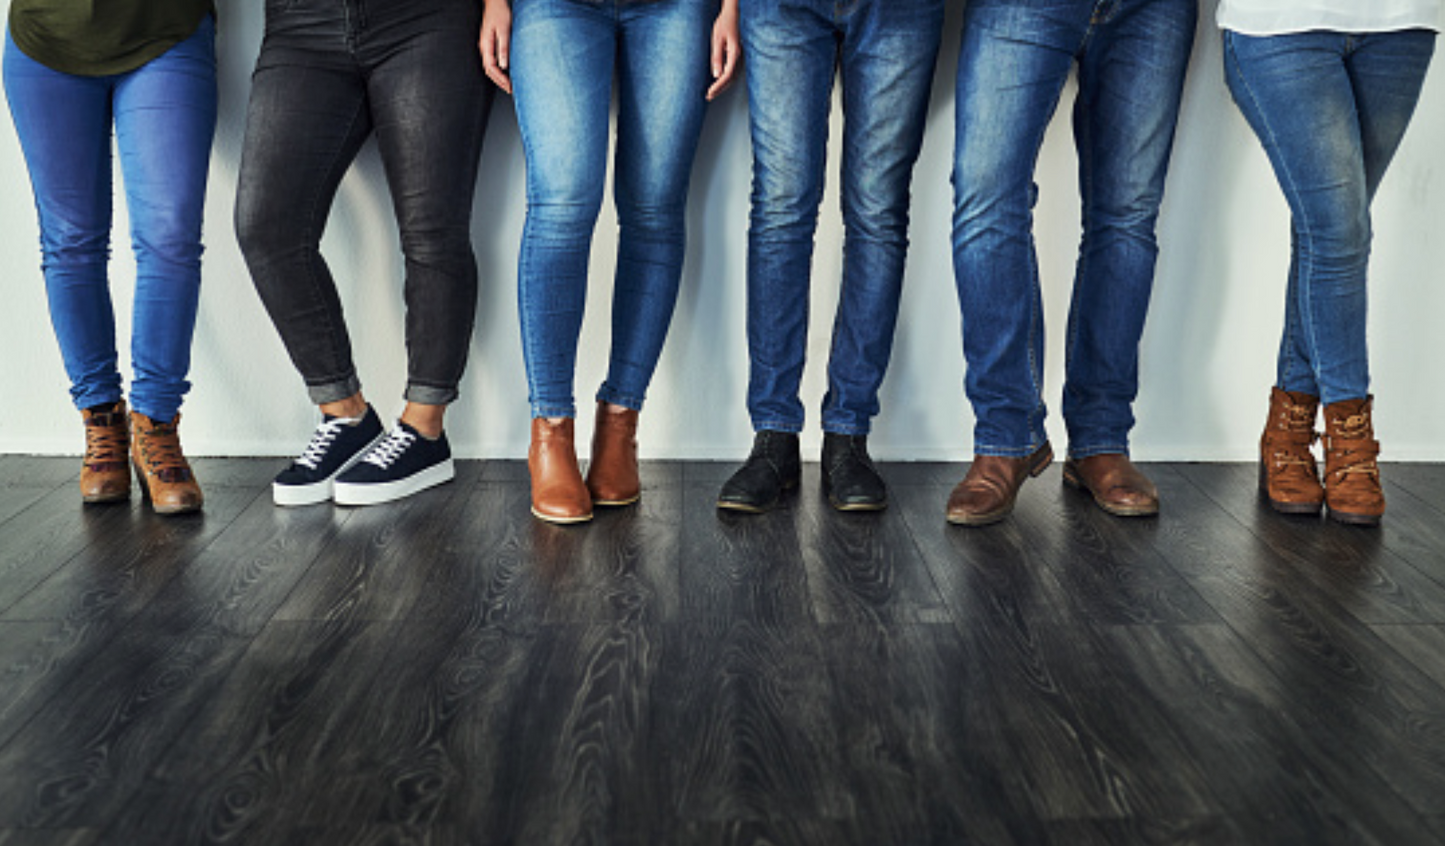 Women’s Jeans vs. Men’s Jeans: The #1 Difference